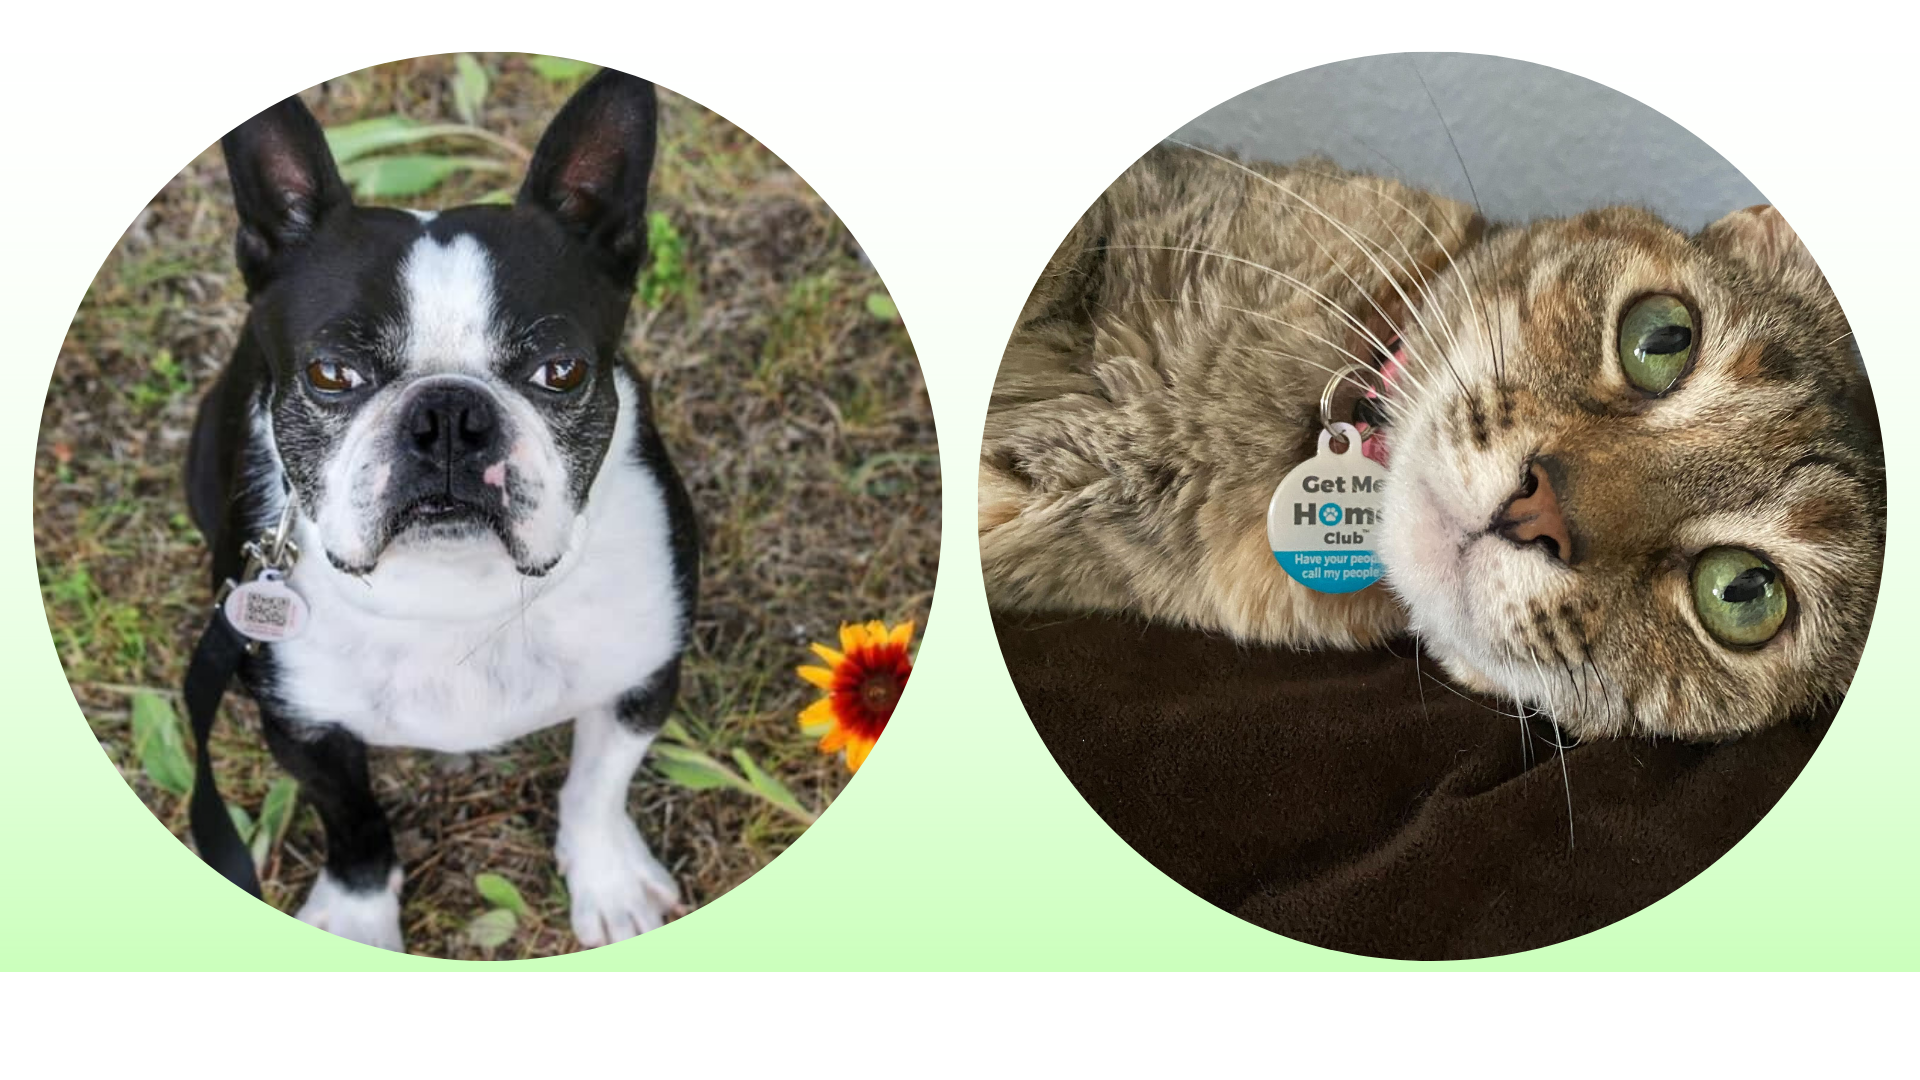 Boston Terrier and Tabby Cat in PetHub ID Tags